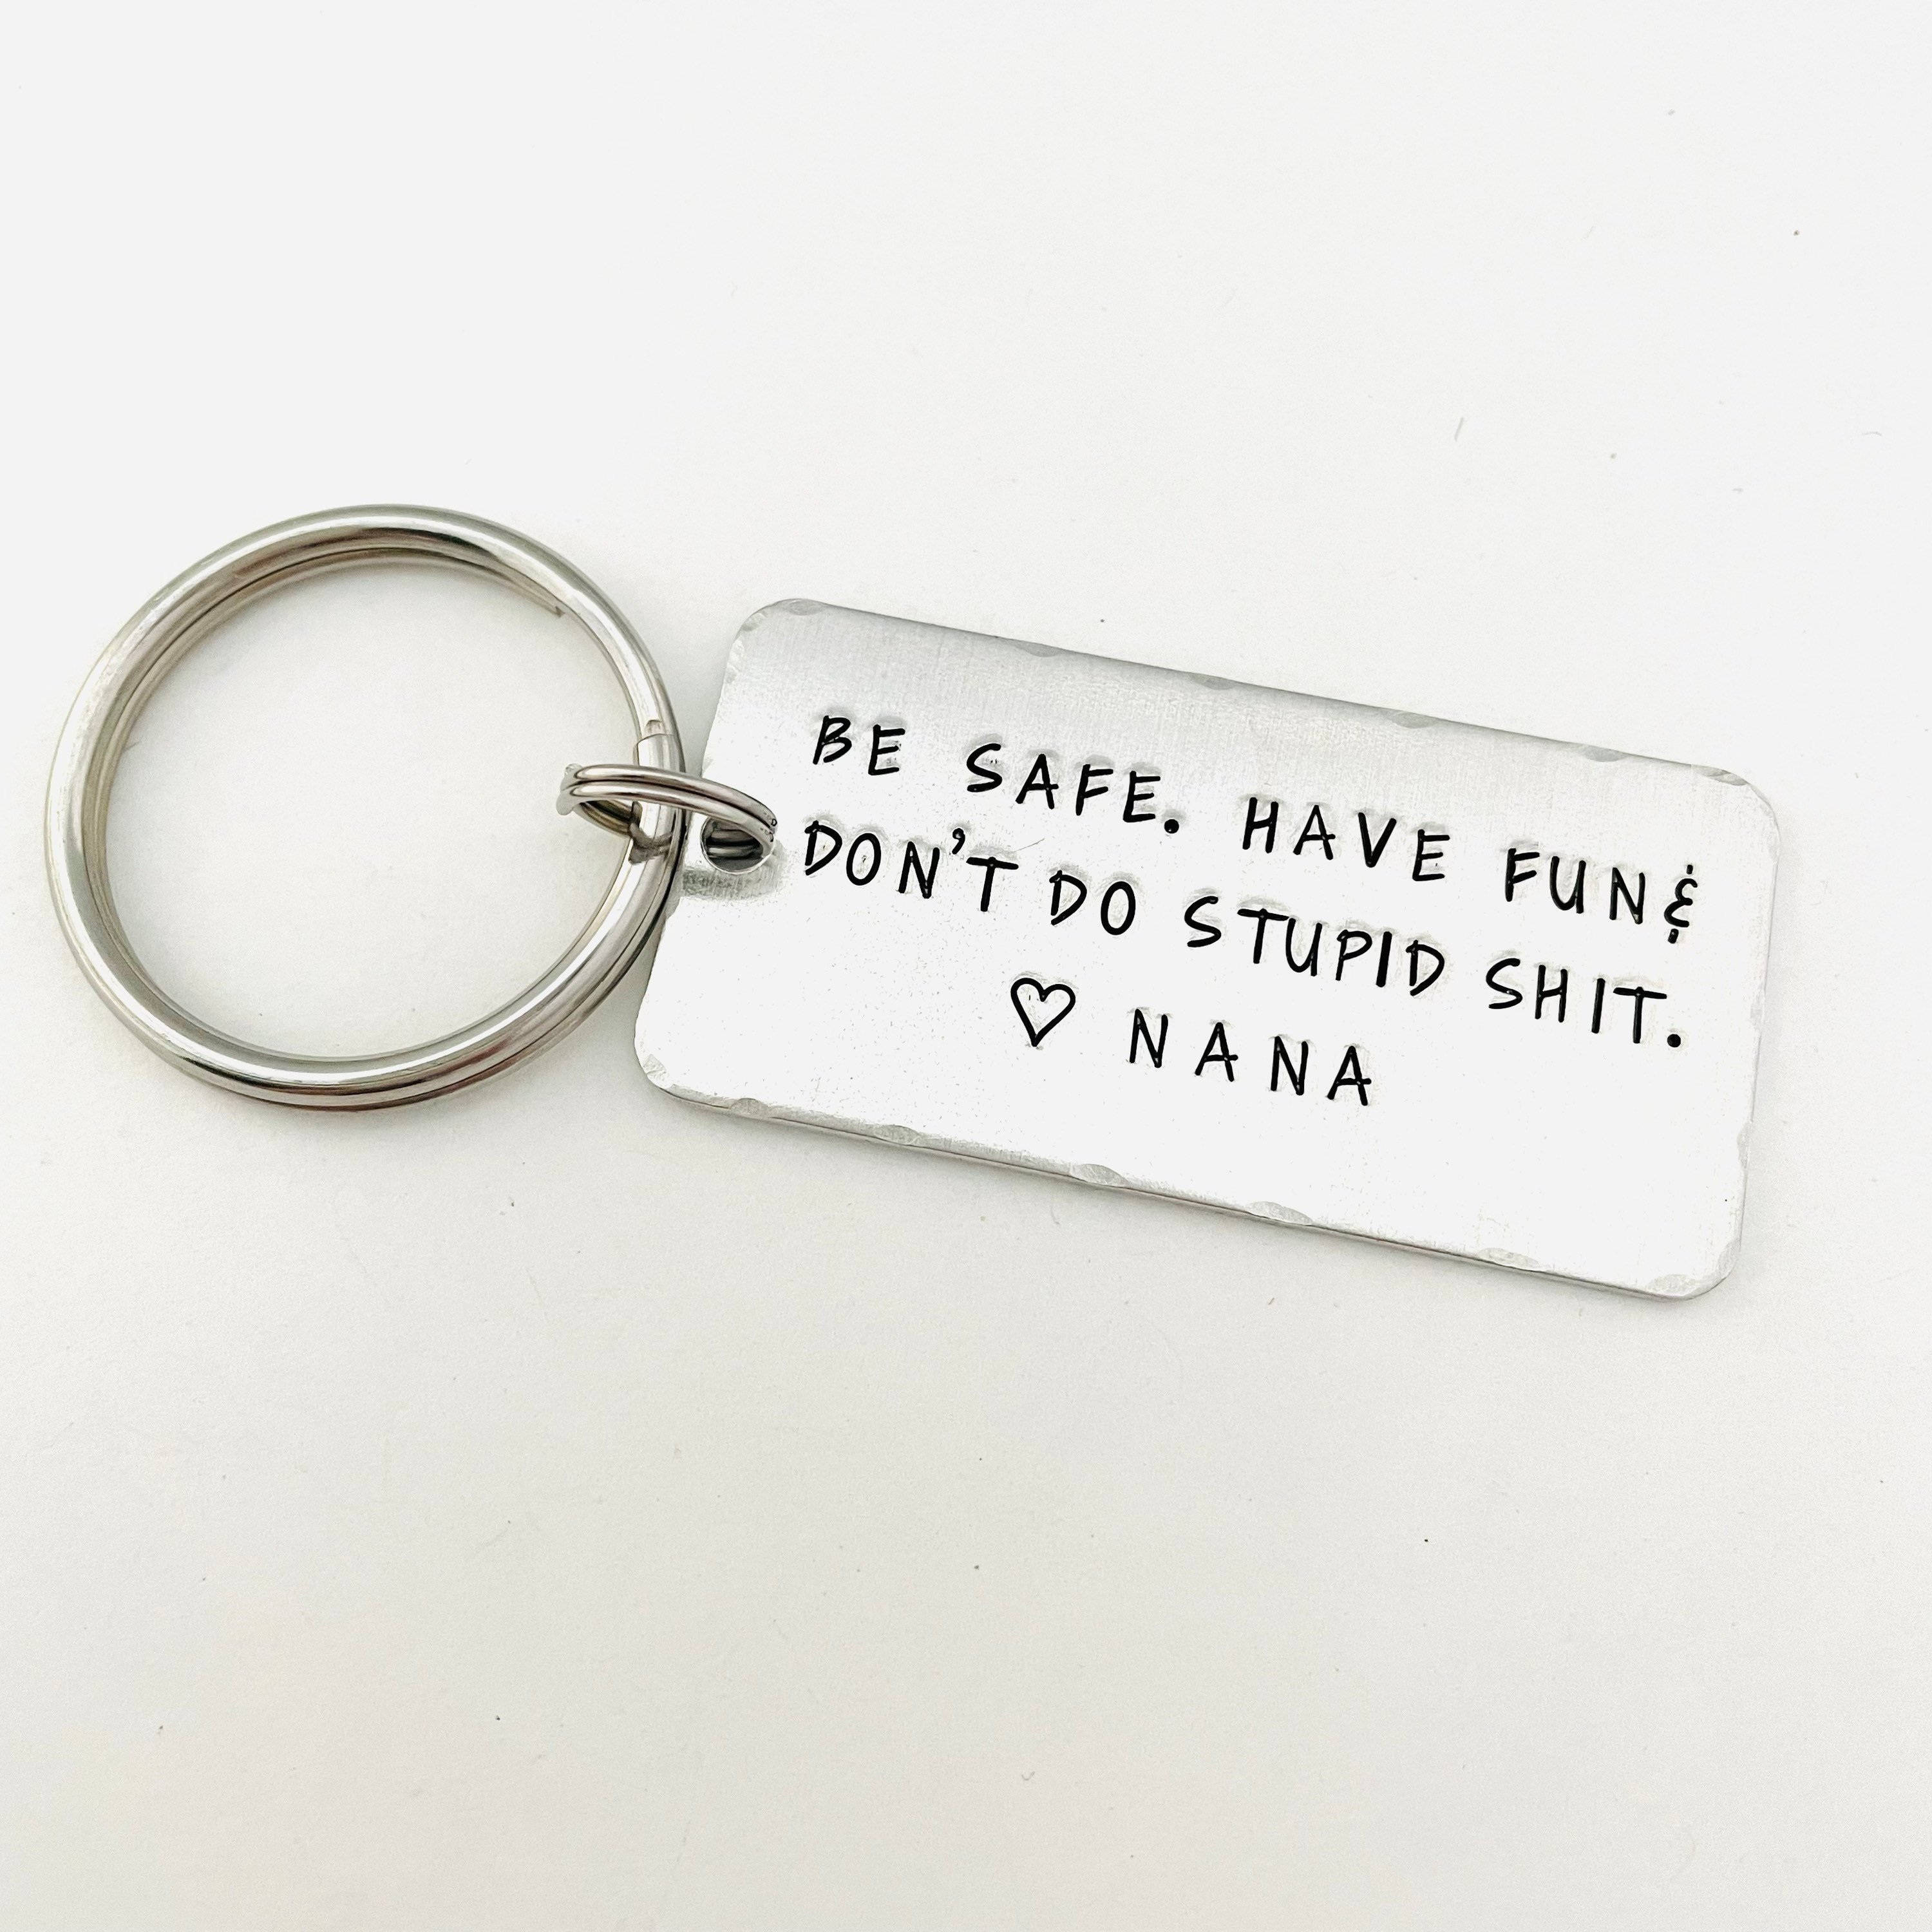 1 PC be safe and don't do stupid keychain